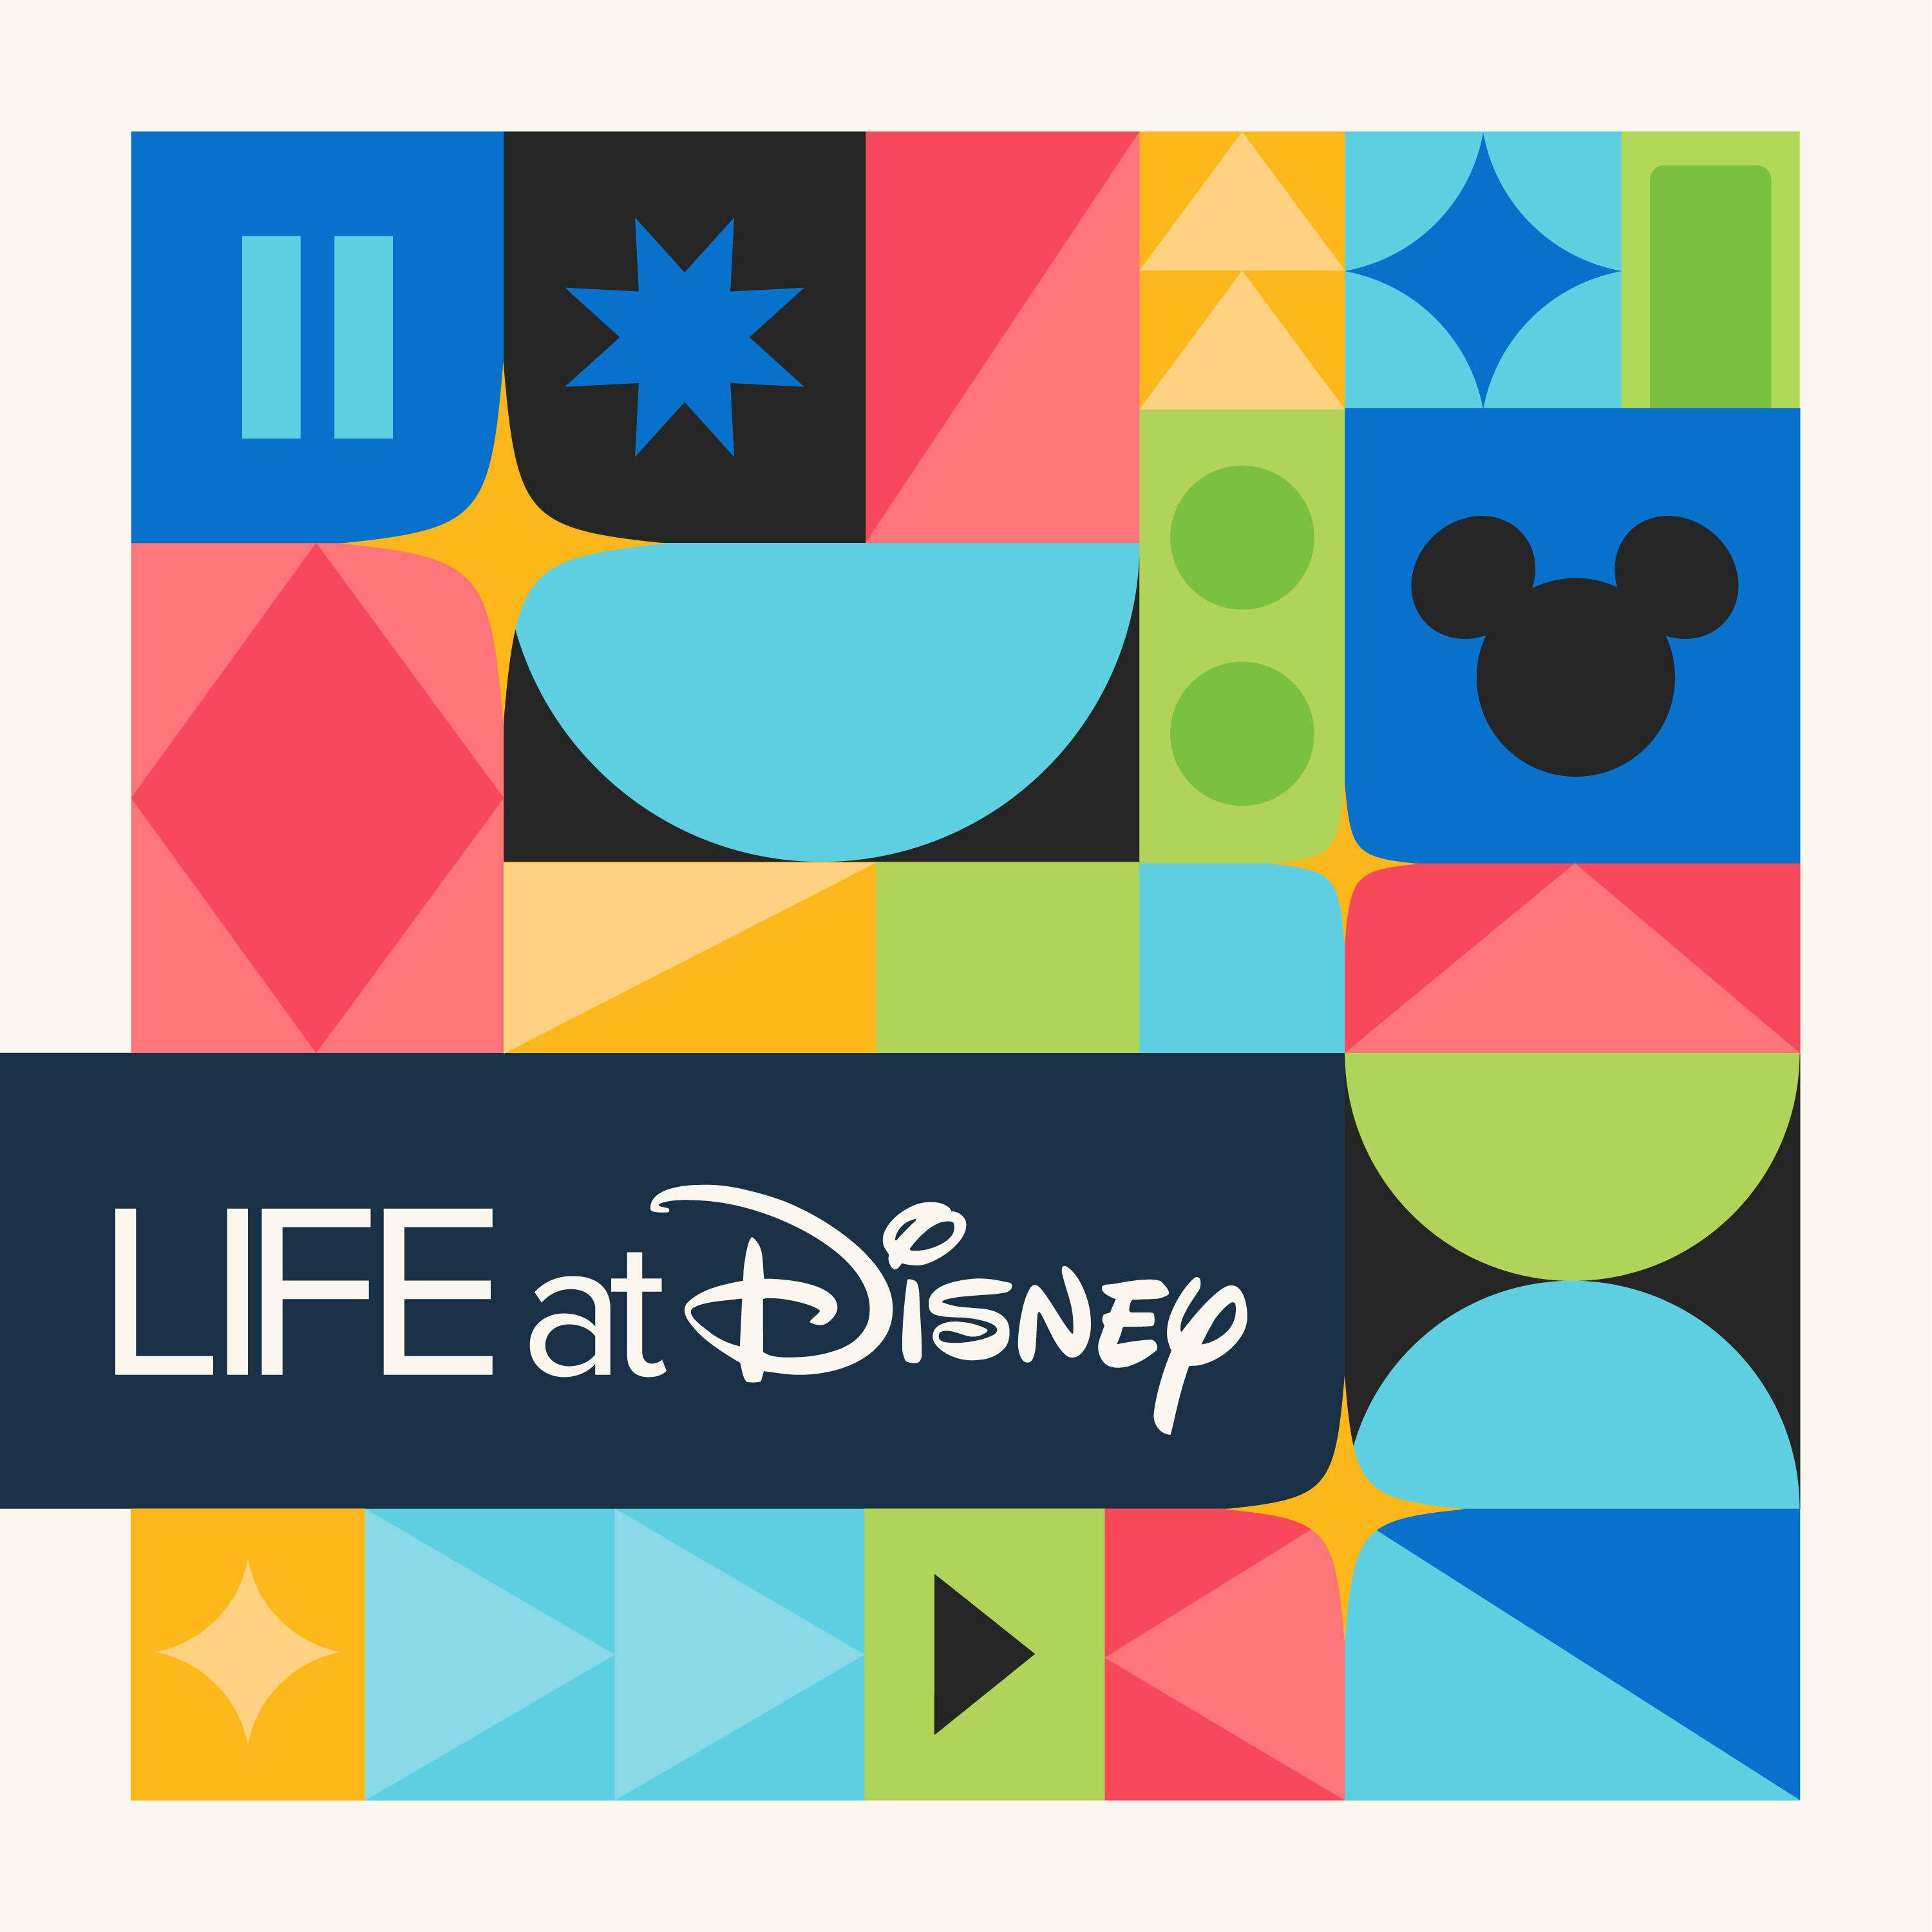 S2 E1 - Meet your Life at Disney Podcast hosts